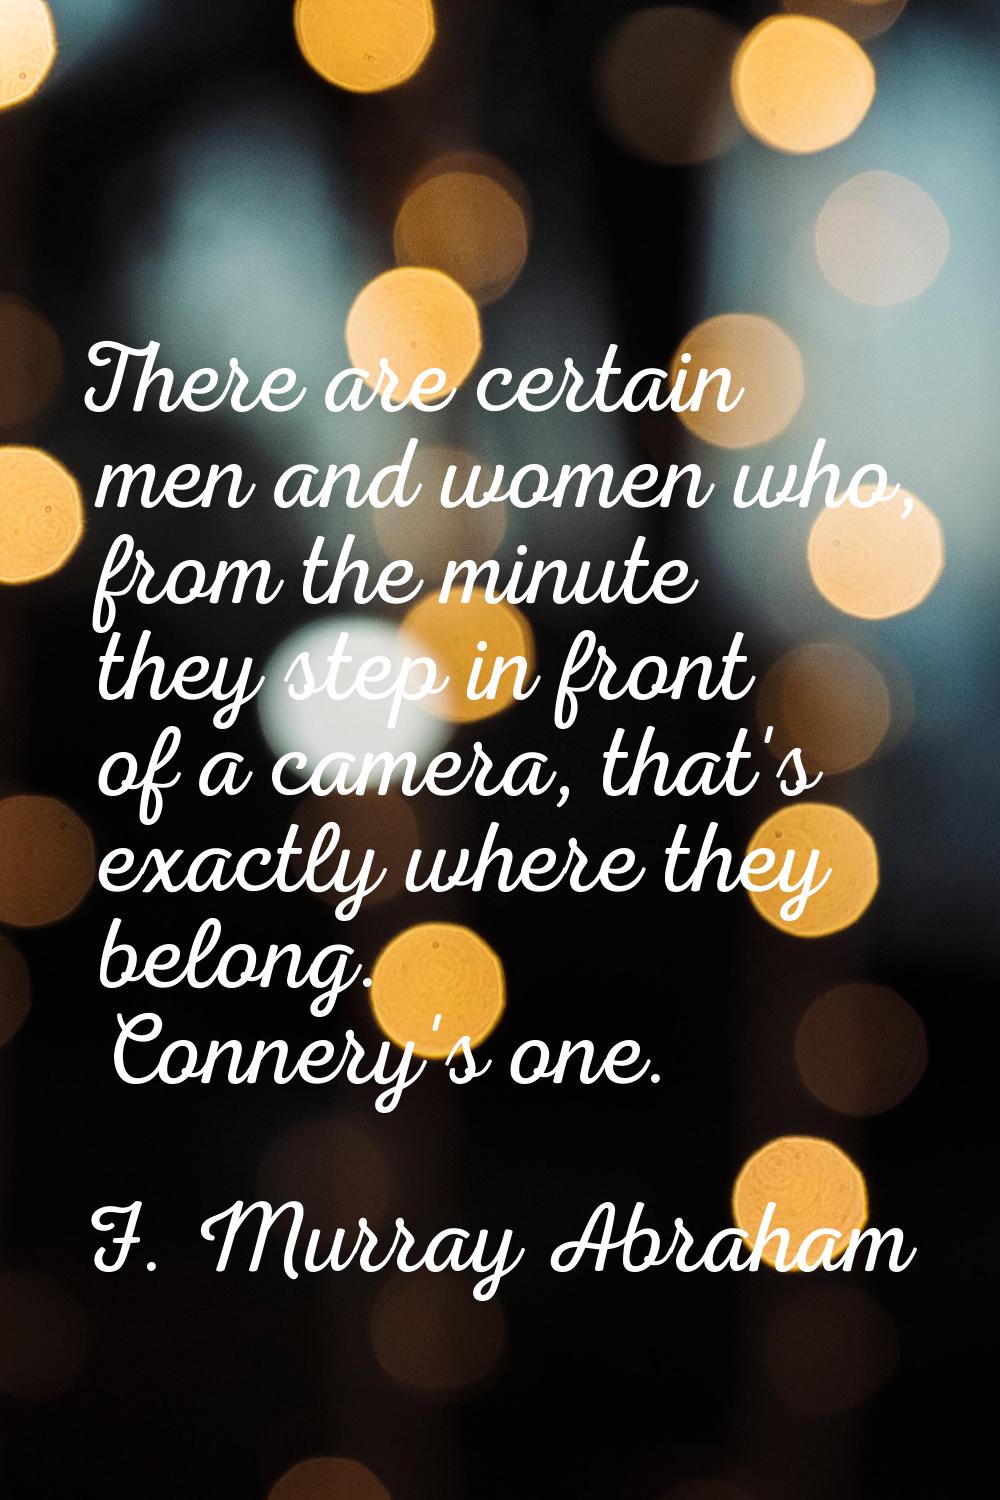 There are certain men and women who, from the minute they step in front of a camera, that's exactly